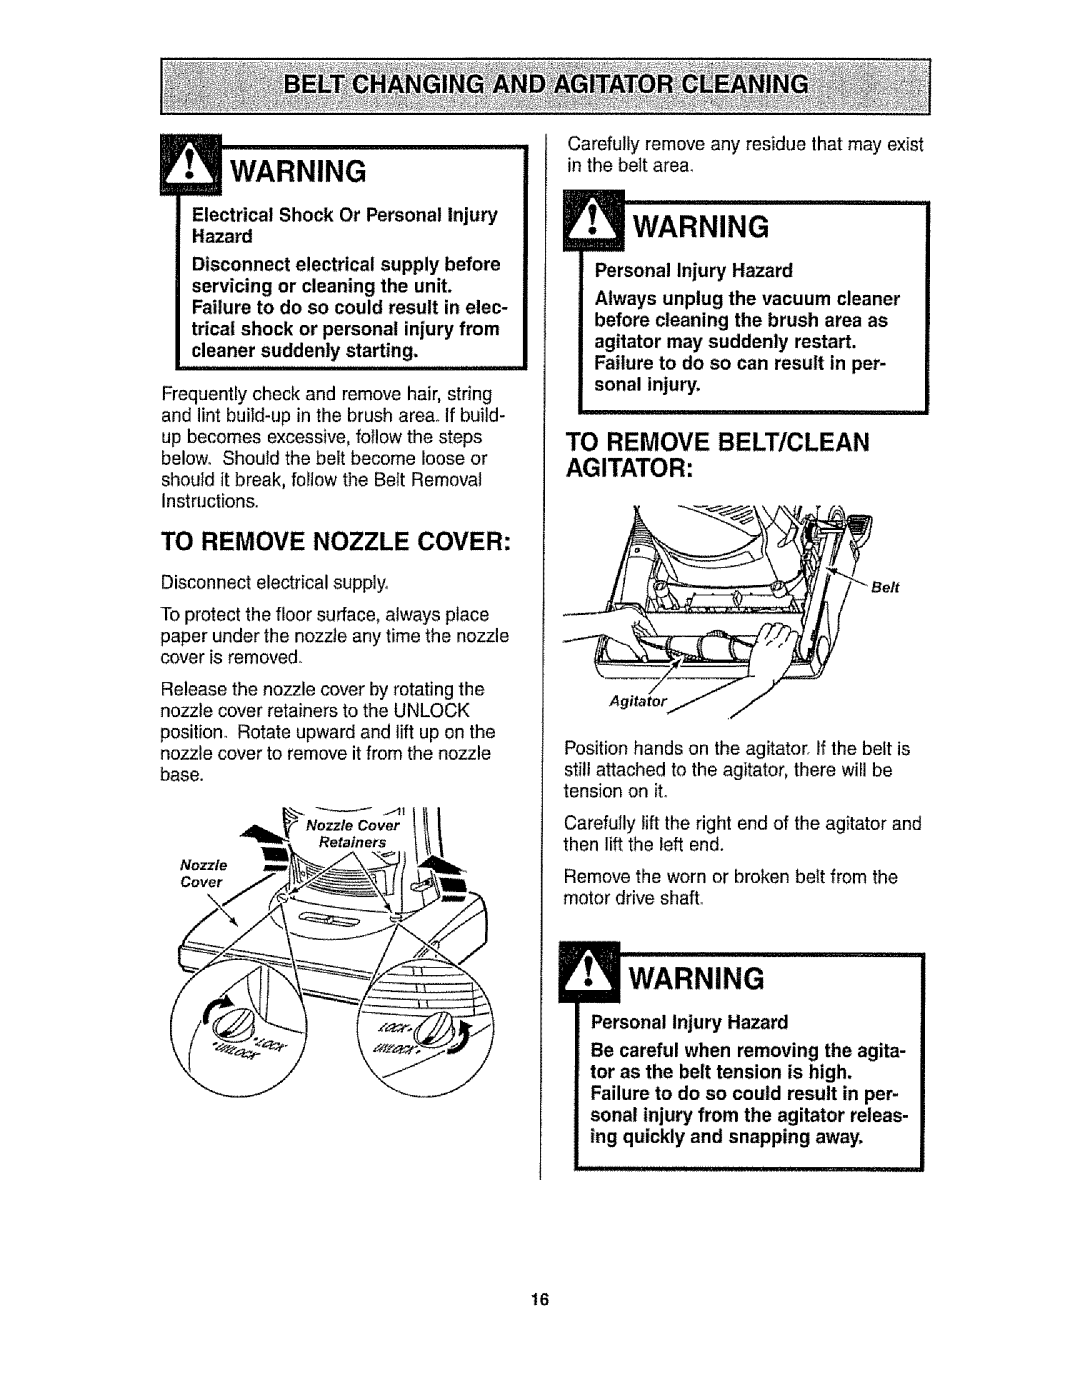 Kenmore 116.31721 owner manual To Remove Nozzle Cover, To Remove Belt/Clean Agitator, Personal Injury Hazard 